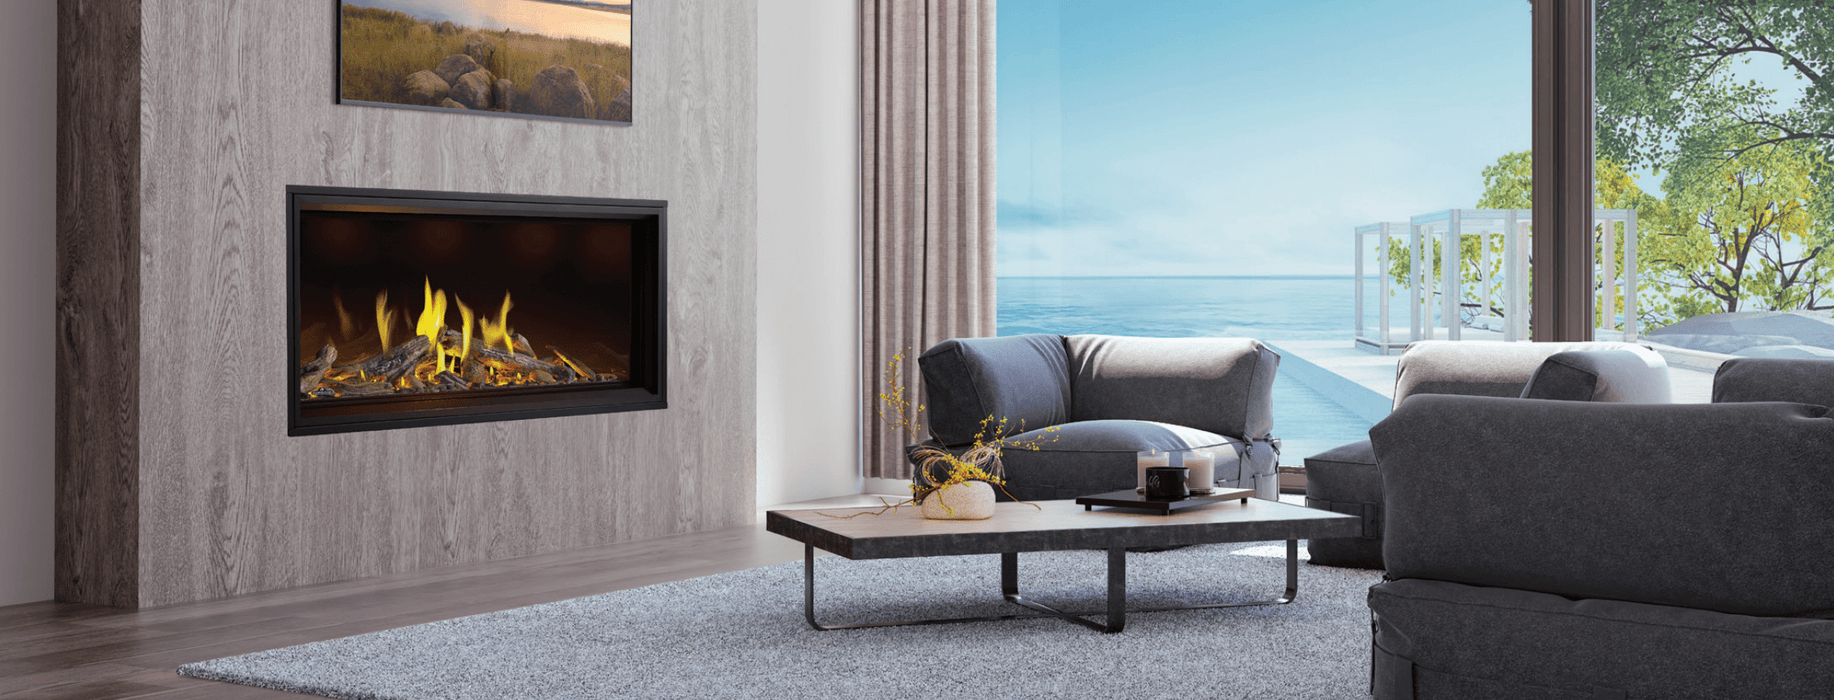 Napoleon Napoleon Tall Linear Vector 62 with Luminous Logs TLV62LN Fireplace Finished - Gas